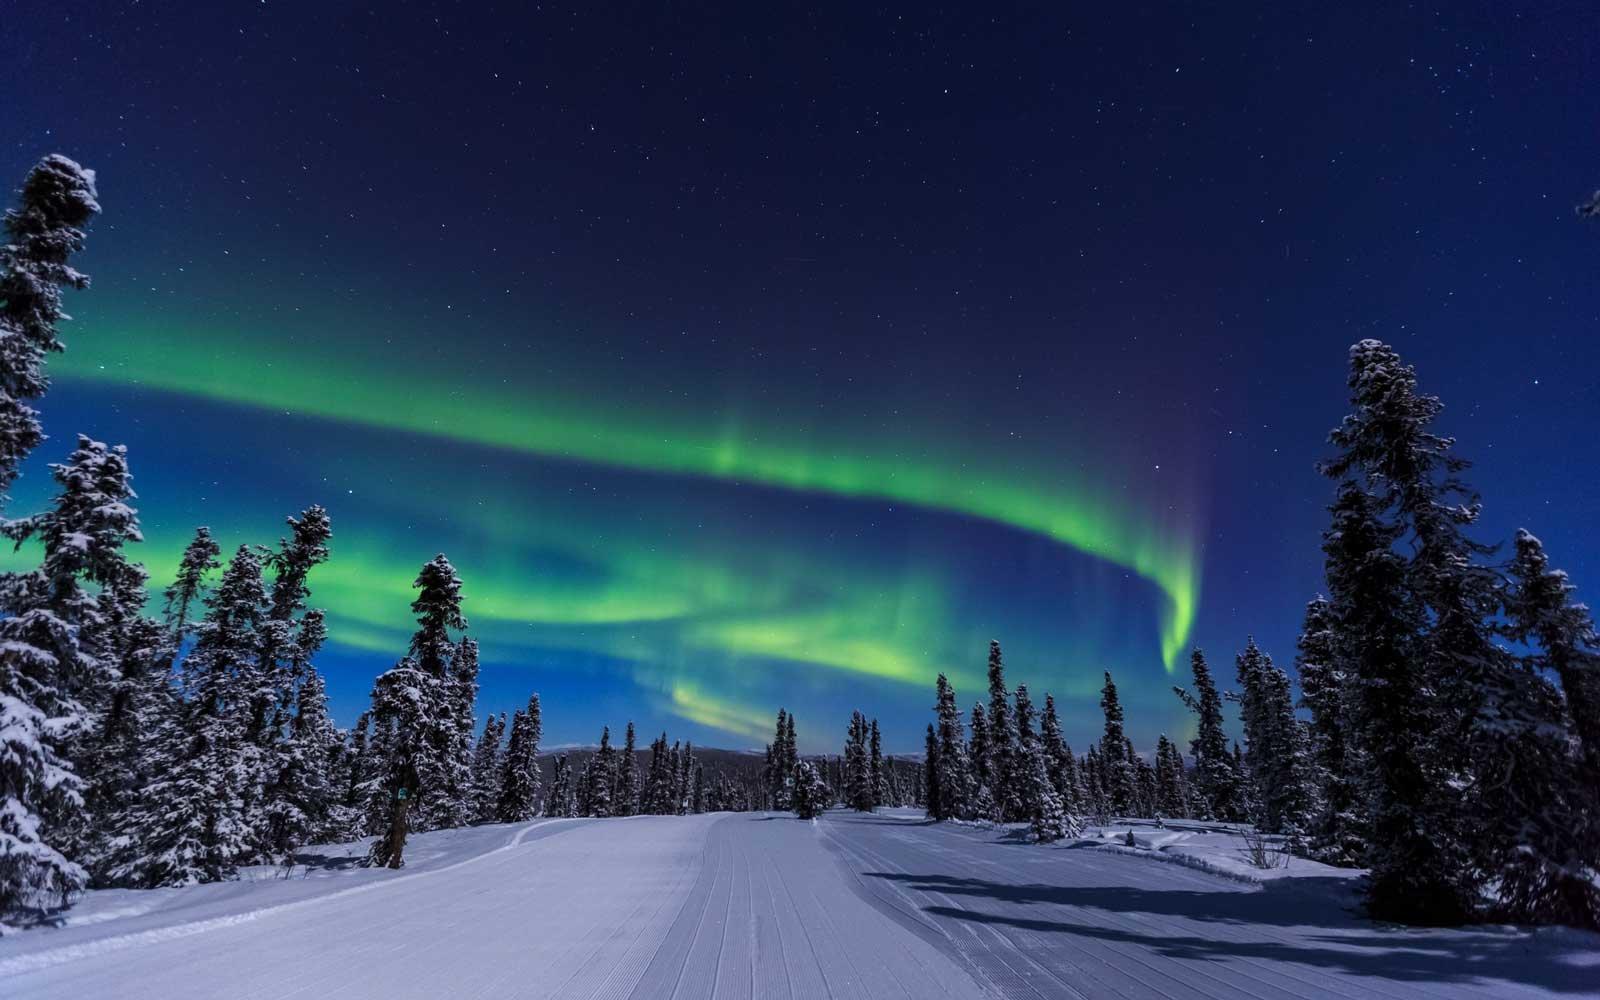 See the Northern Lights with Alaska Railroad. Travel + Leisure